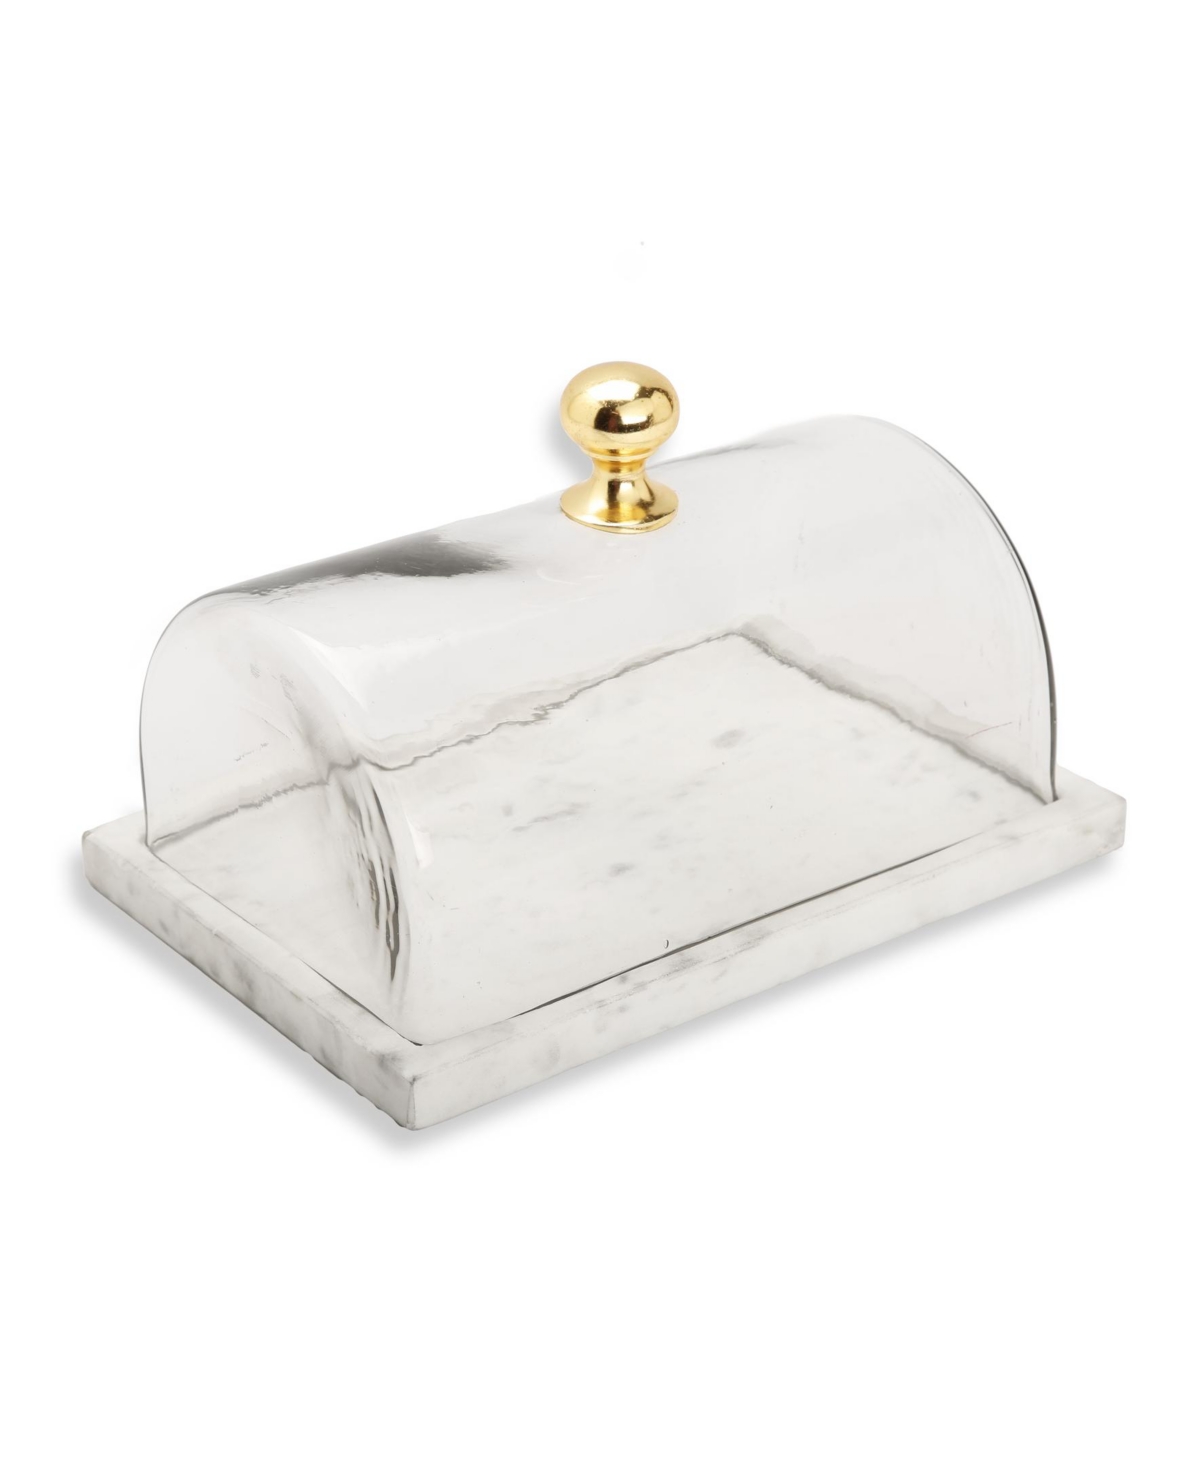 Classic Touch Rectangular Marble Cake Dome With Knob In Gold